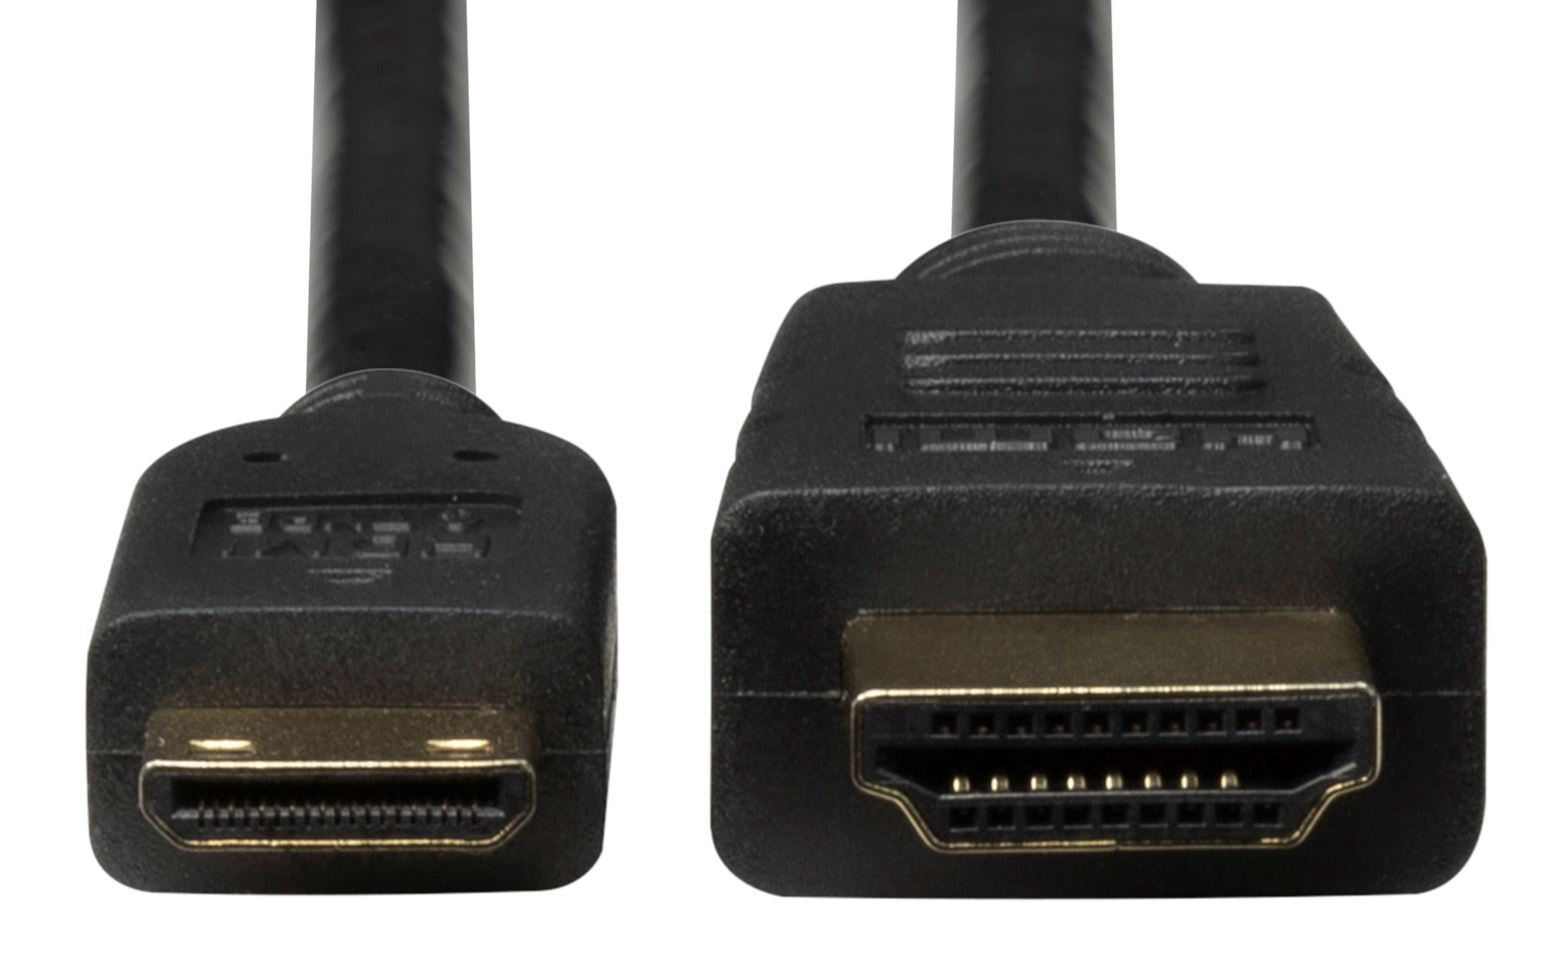 DYNAMIX_2m_HDMI_to_HDMI_Mini_Cable_High-Speed_with_Ethernet_Max_Res:_4K@60Hz_(3840x2160) 664